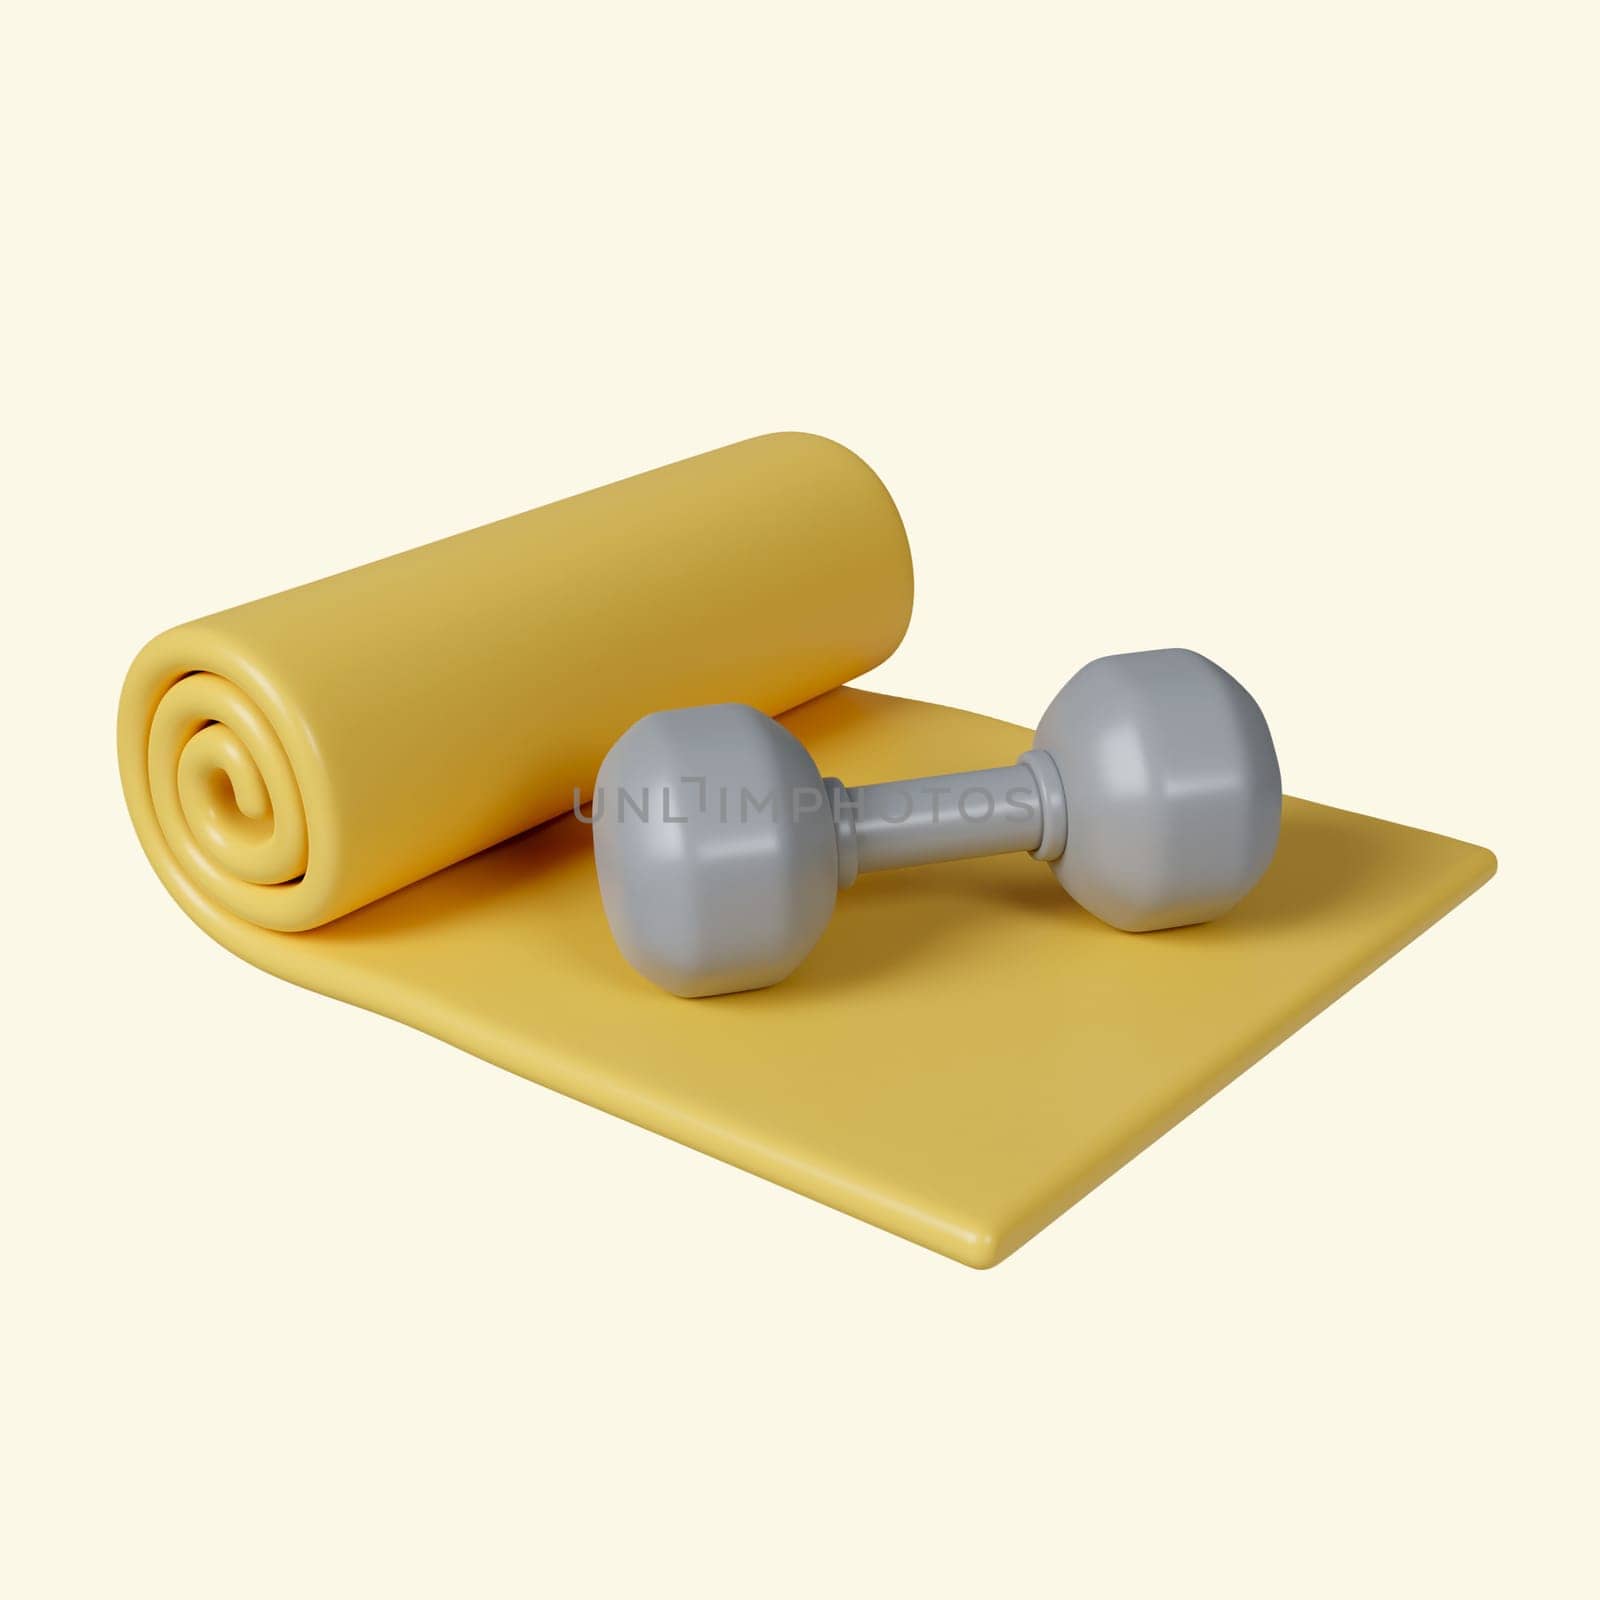 3d yellow yoga mat with dumbbell. Fitness and health. Exercise equipment. icon isolated on yellow background. 3d rendering illustration. Clipping path. by meepiangraphic